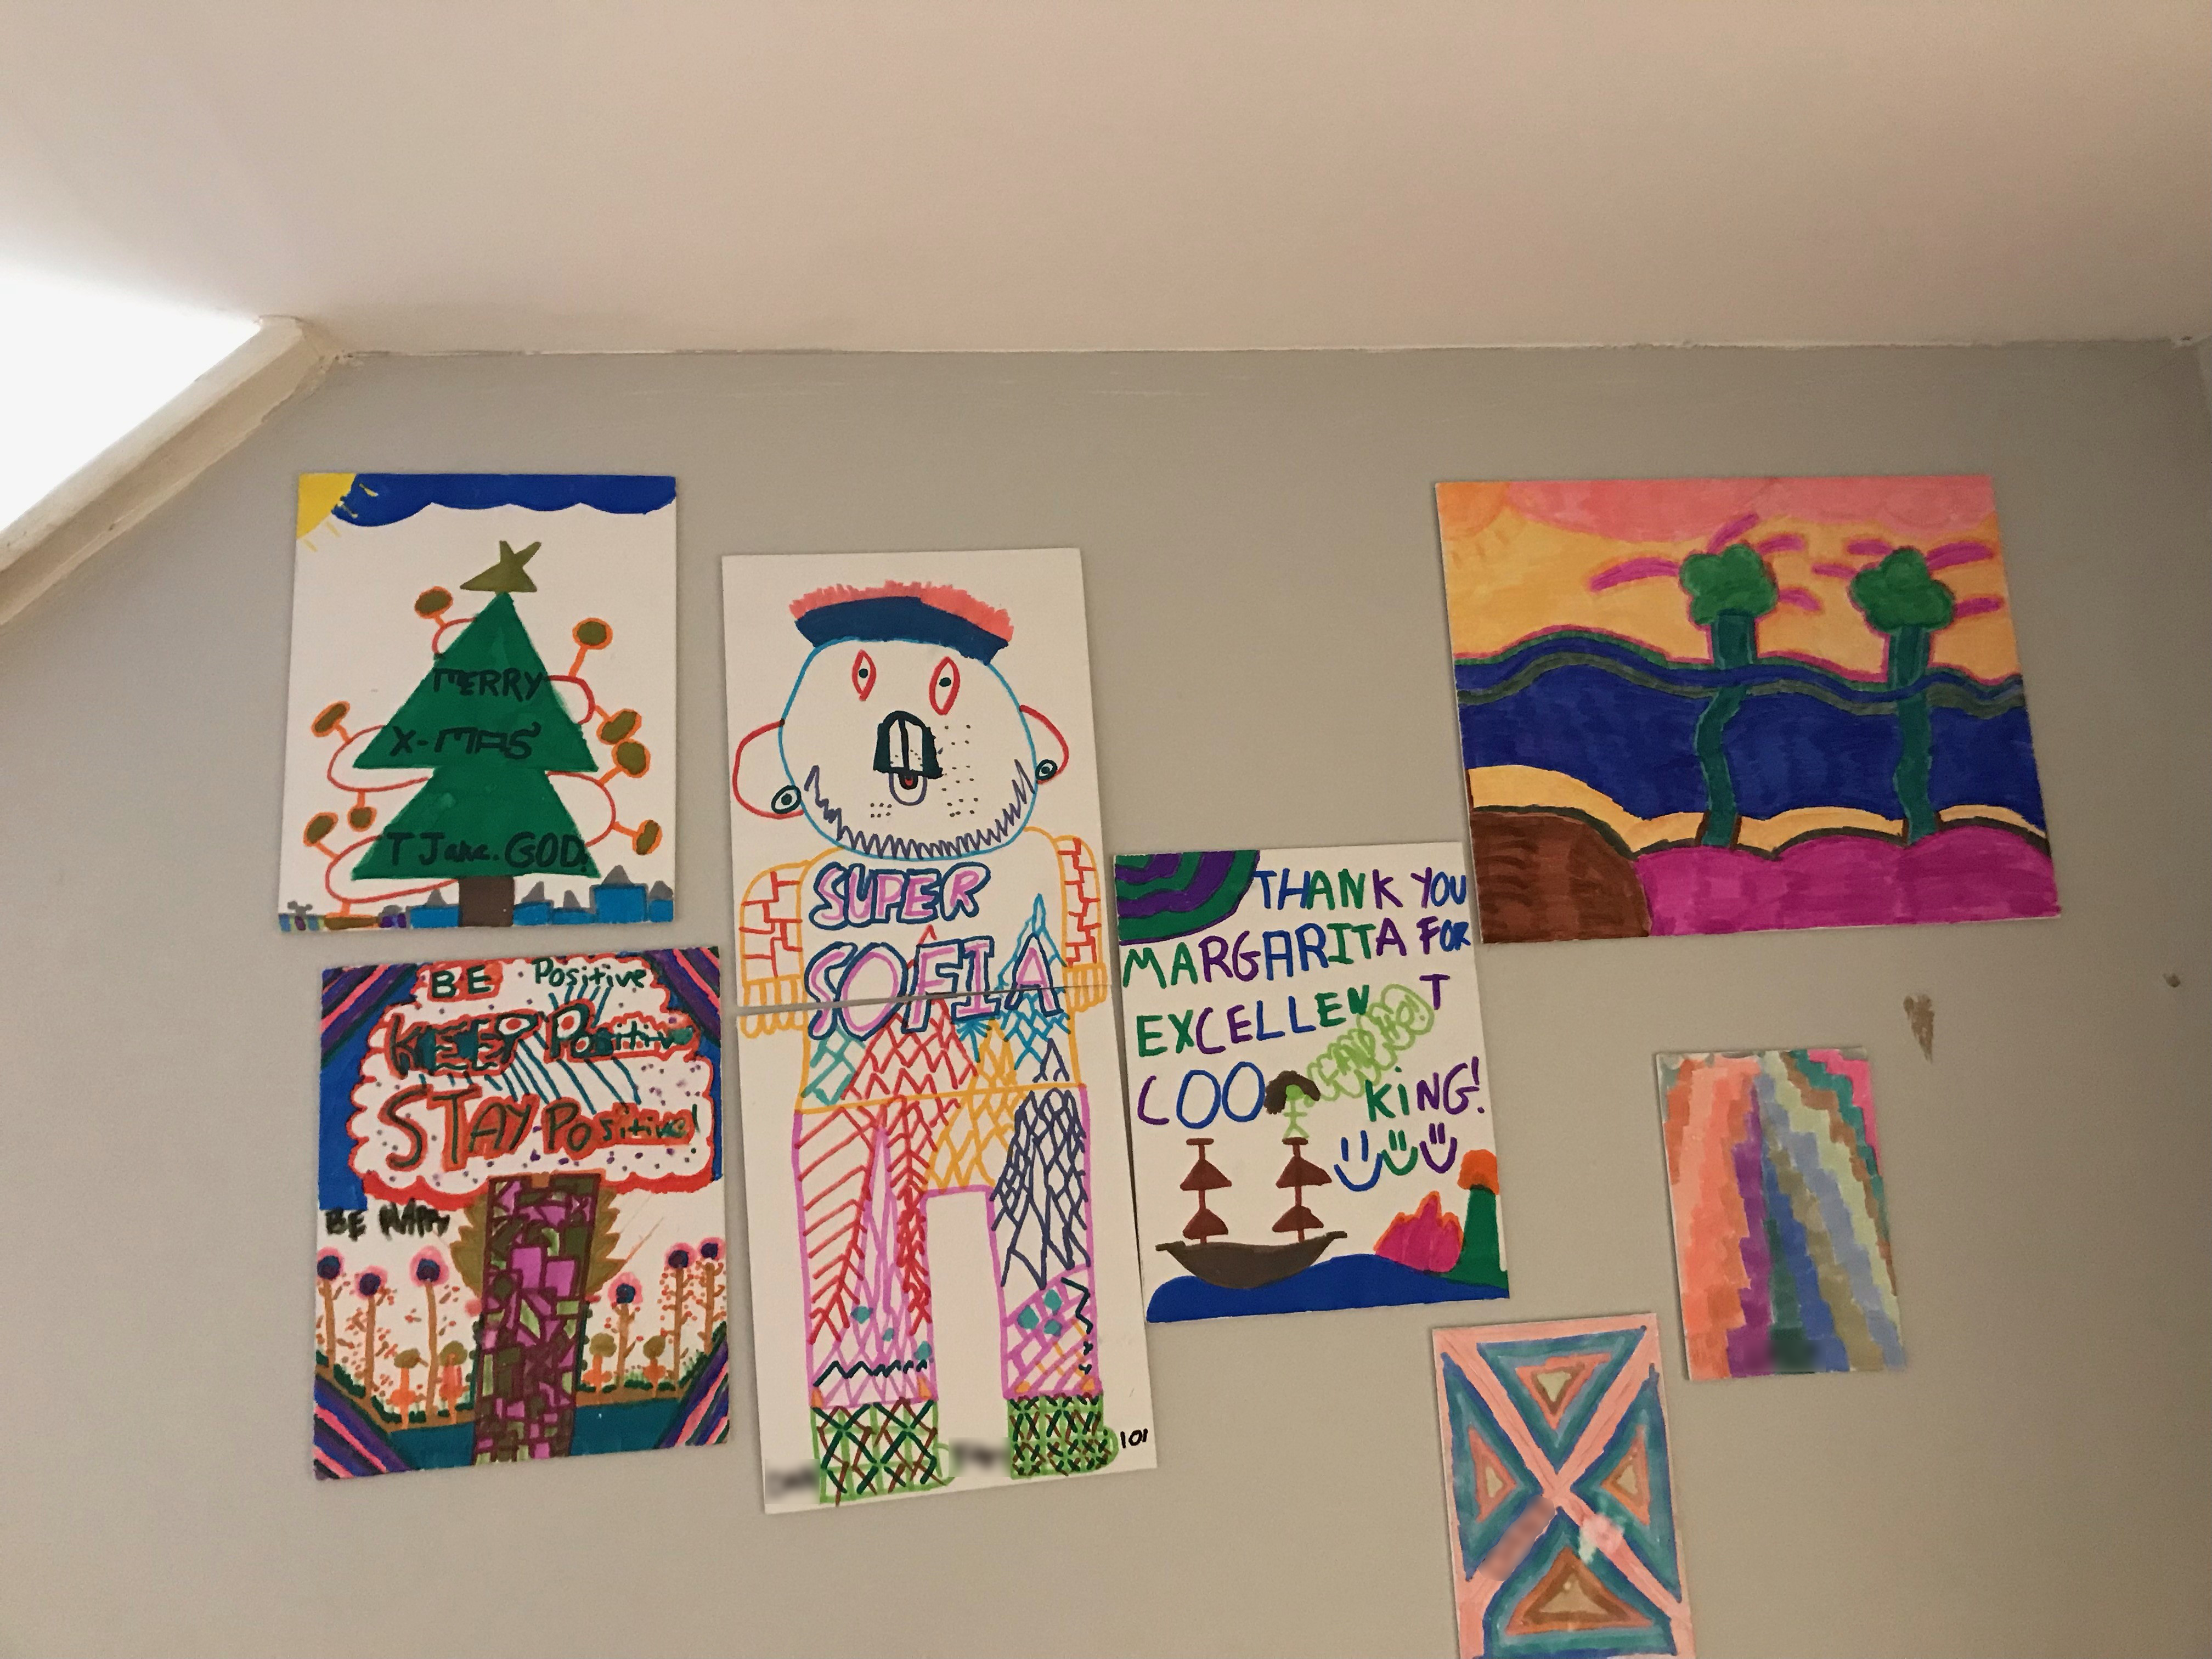 A wall with seven drawings and paintings hanging. The pictures include landscapes, colorful abstract designs, a seascape, a portrait, a Christmas tree, and an image with flowers and the words "Be Positive; Stay Positive"